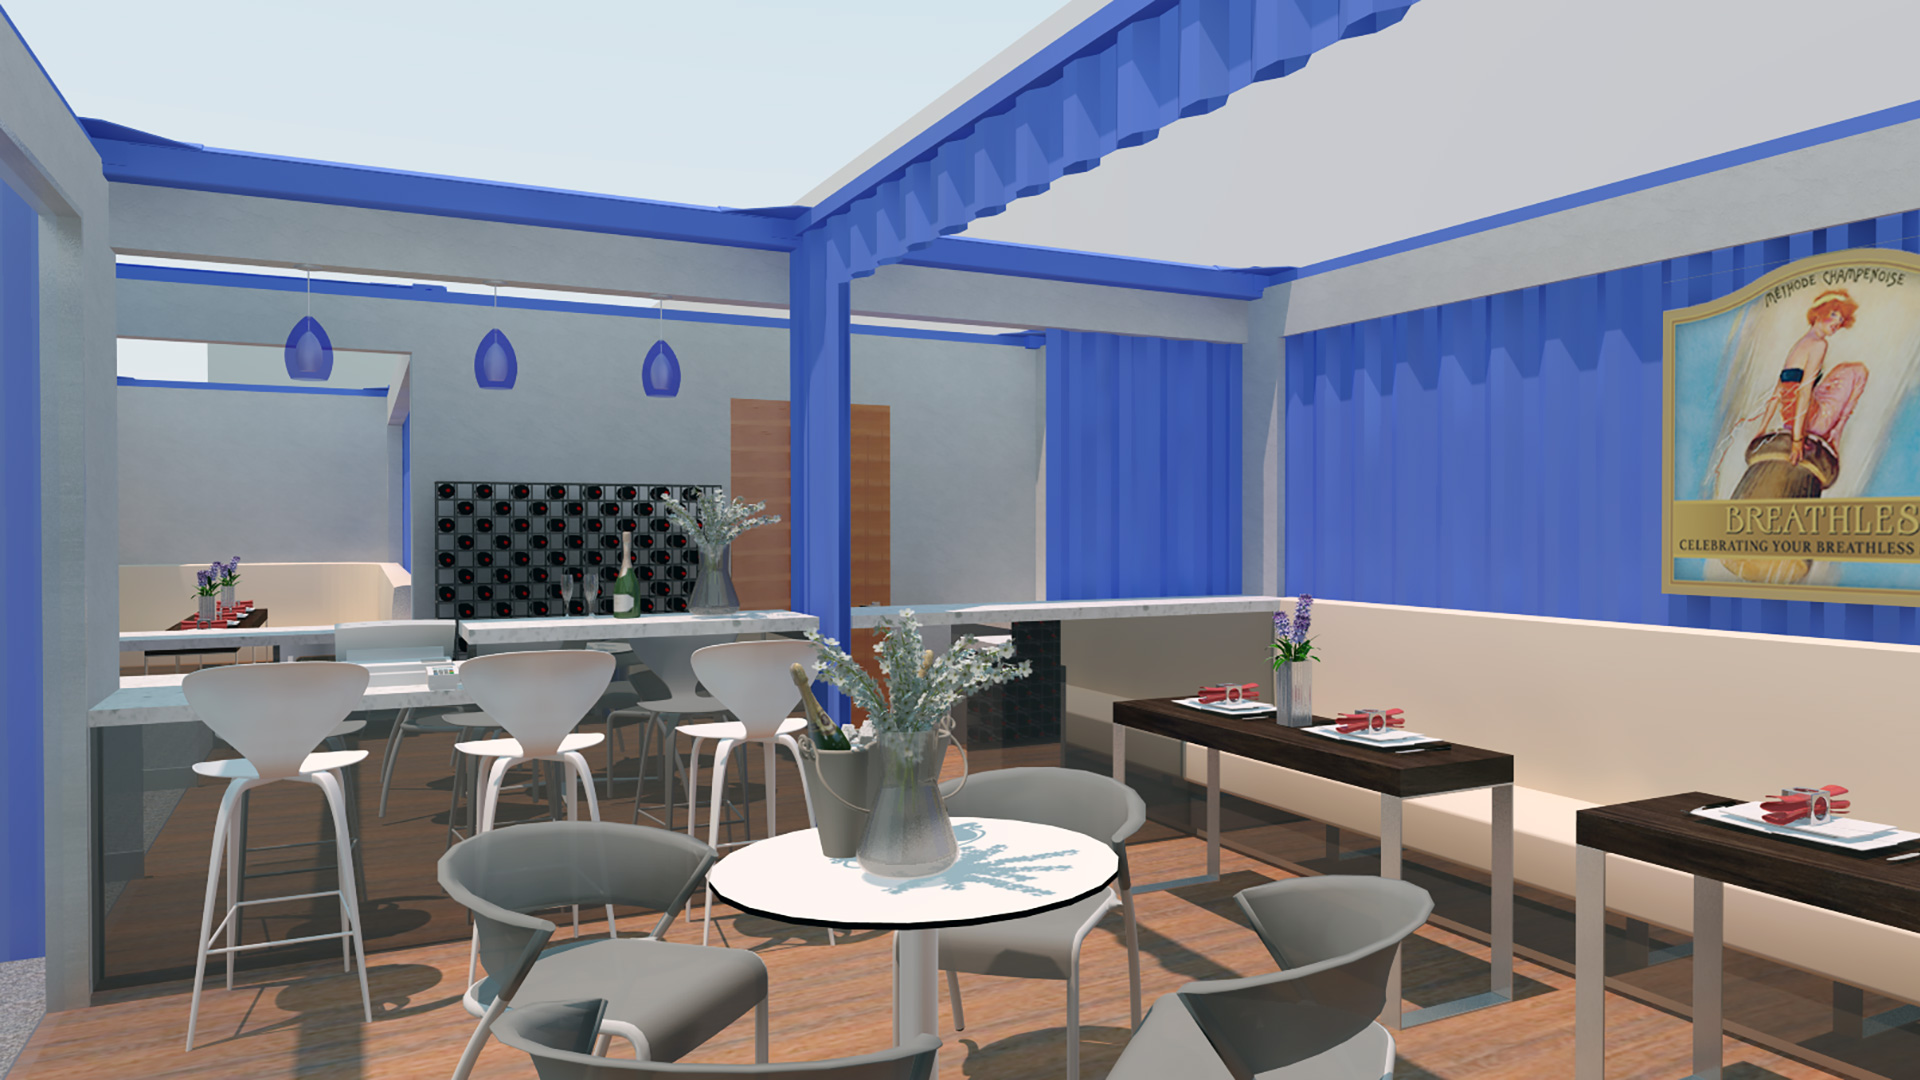 Rendering of interior of tasting room, with raw shipping container walls and seating areas.